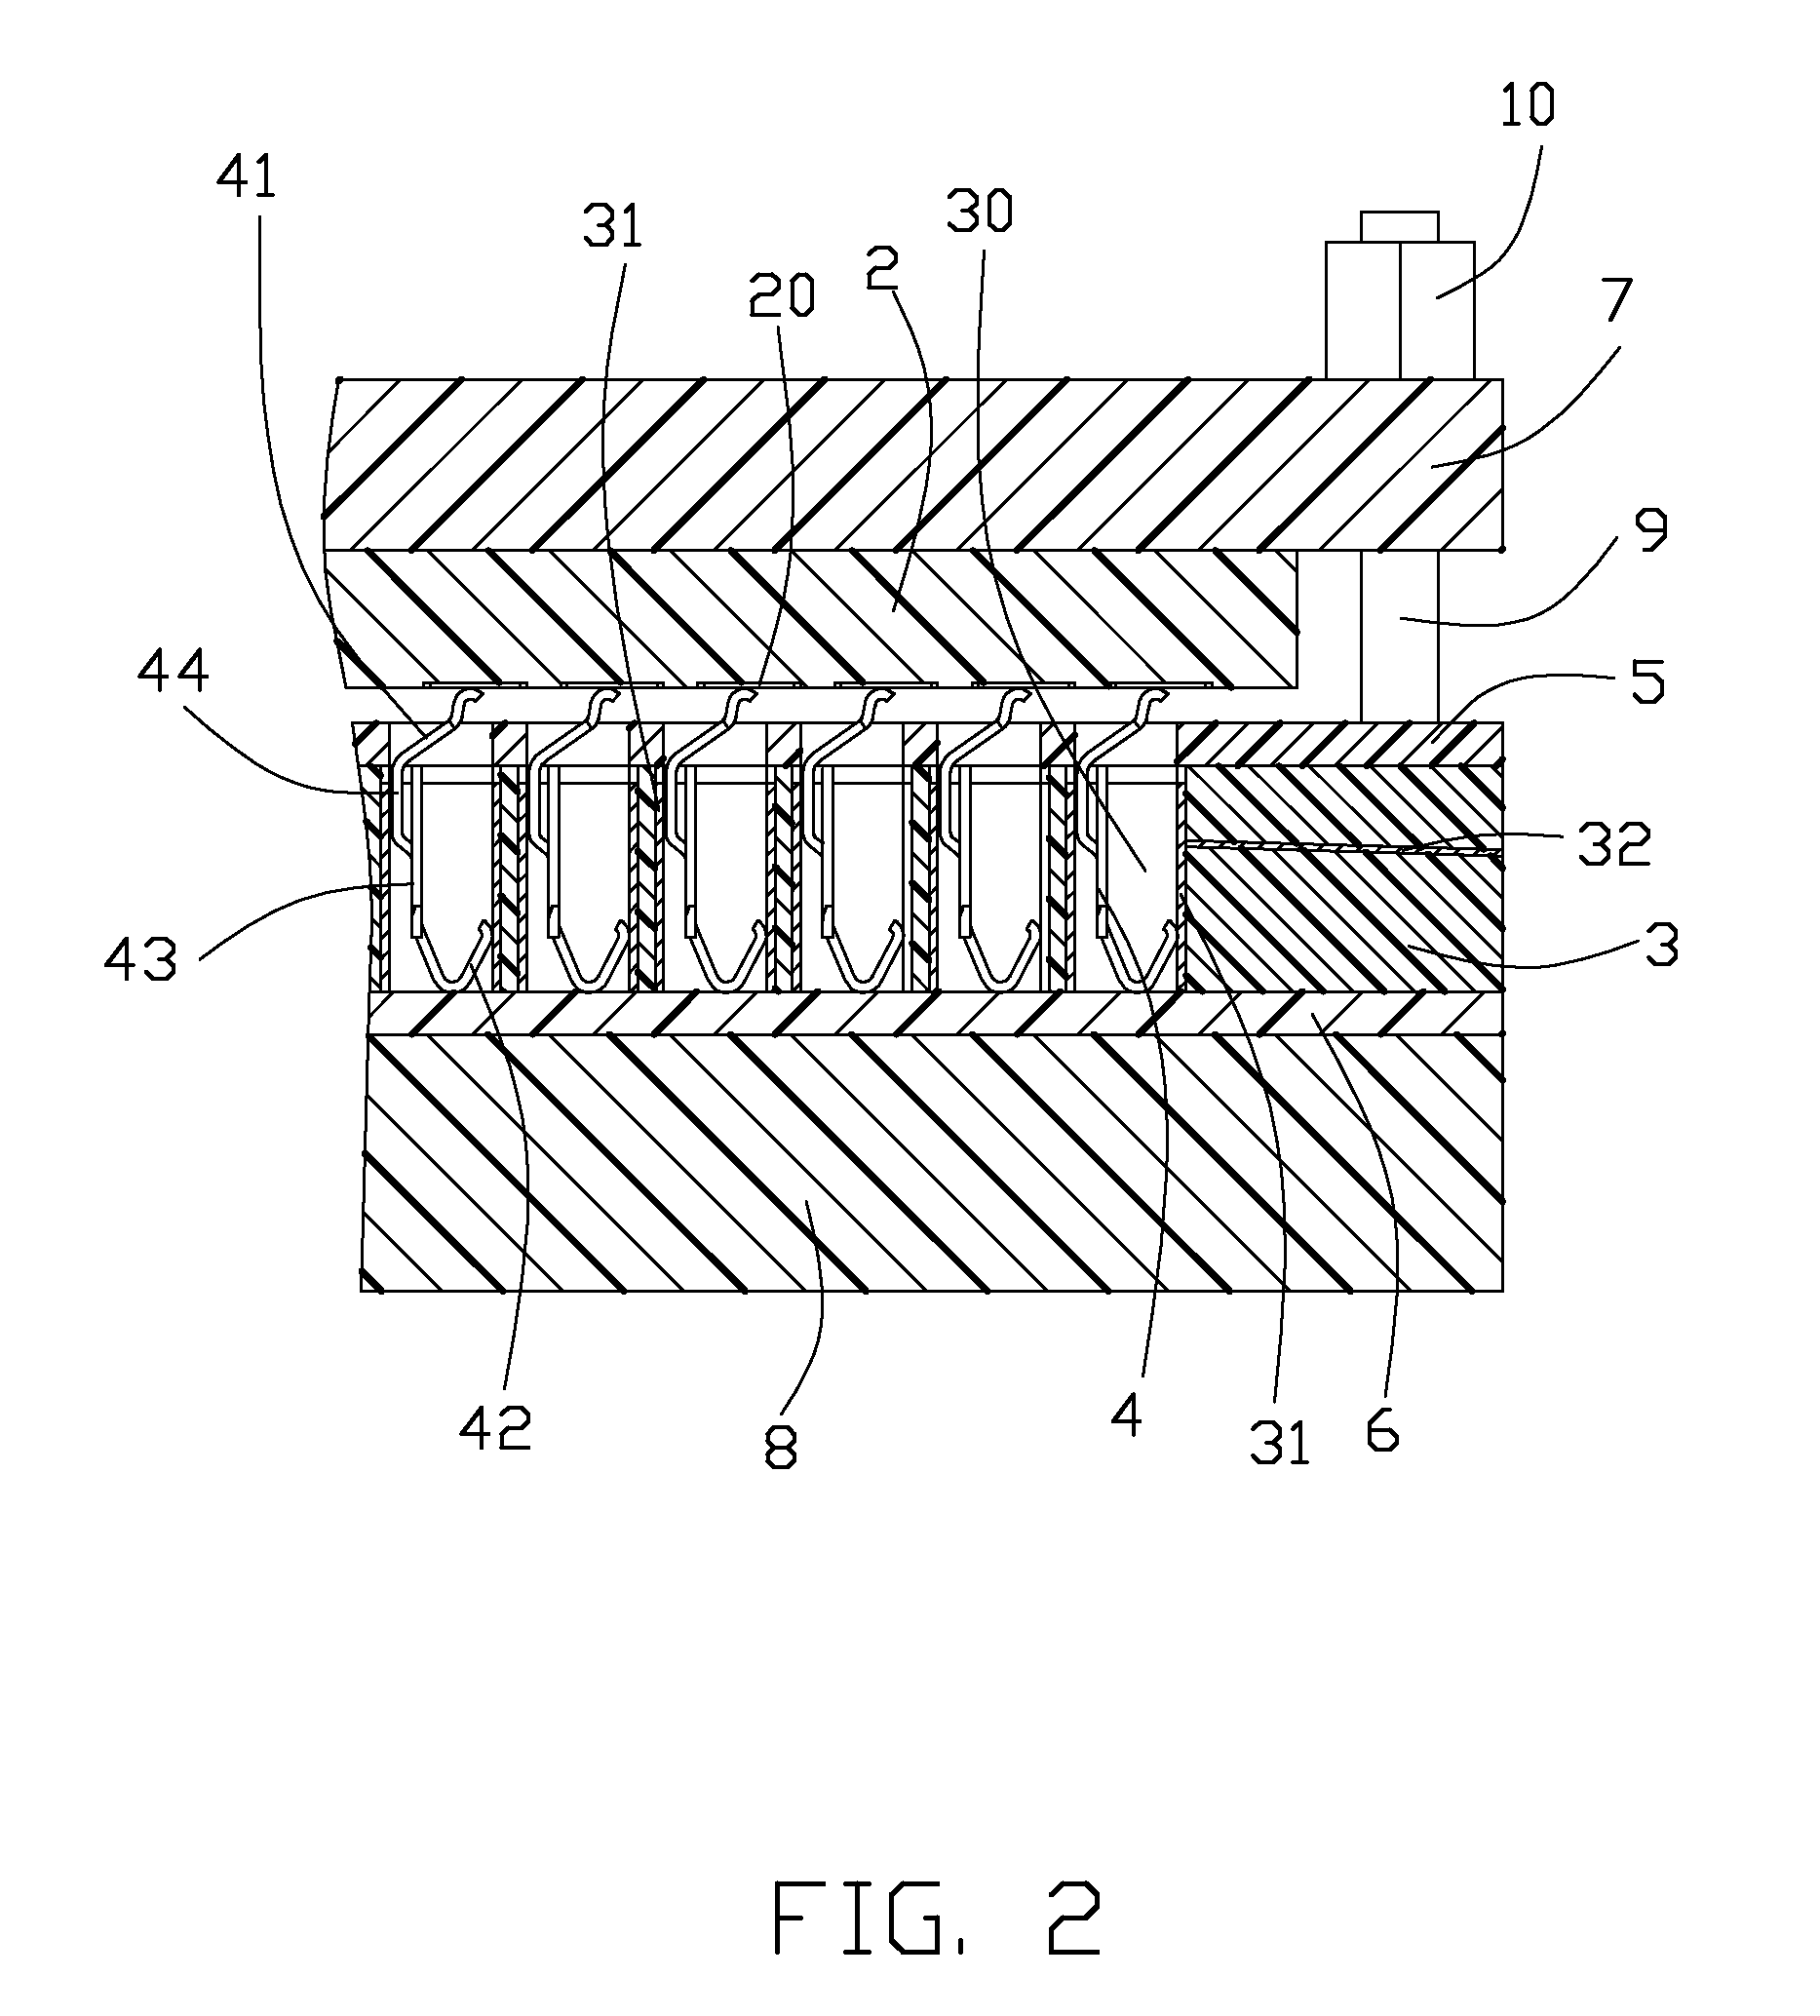 Electrical connection arrangement having PCB with contacts received therein